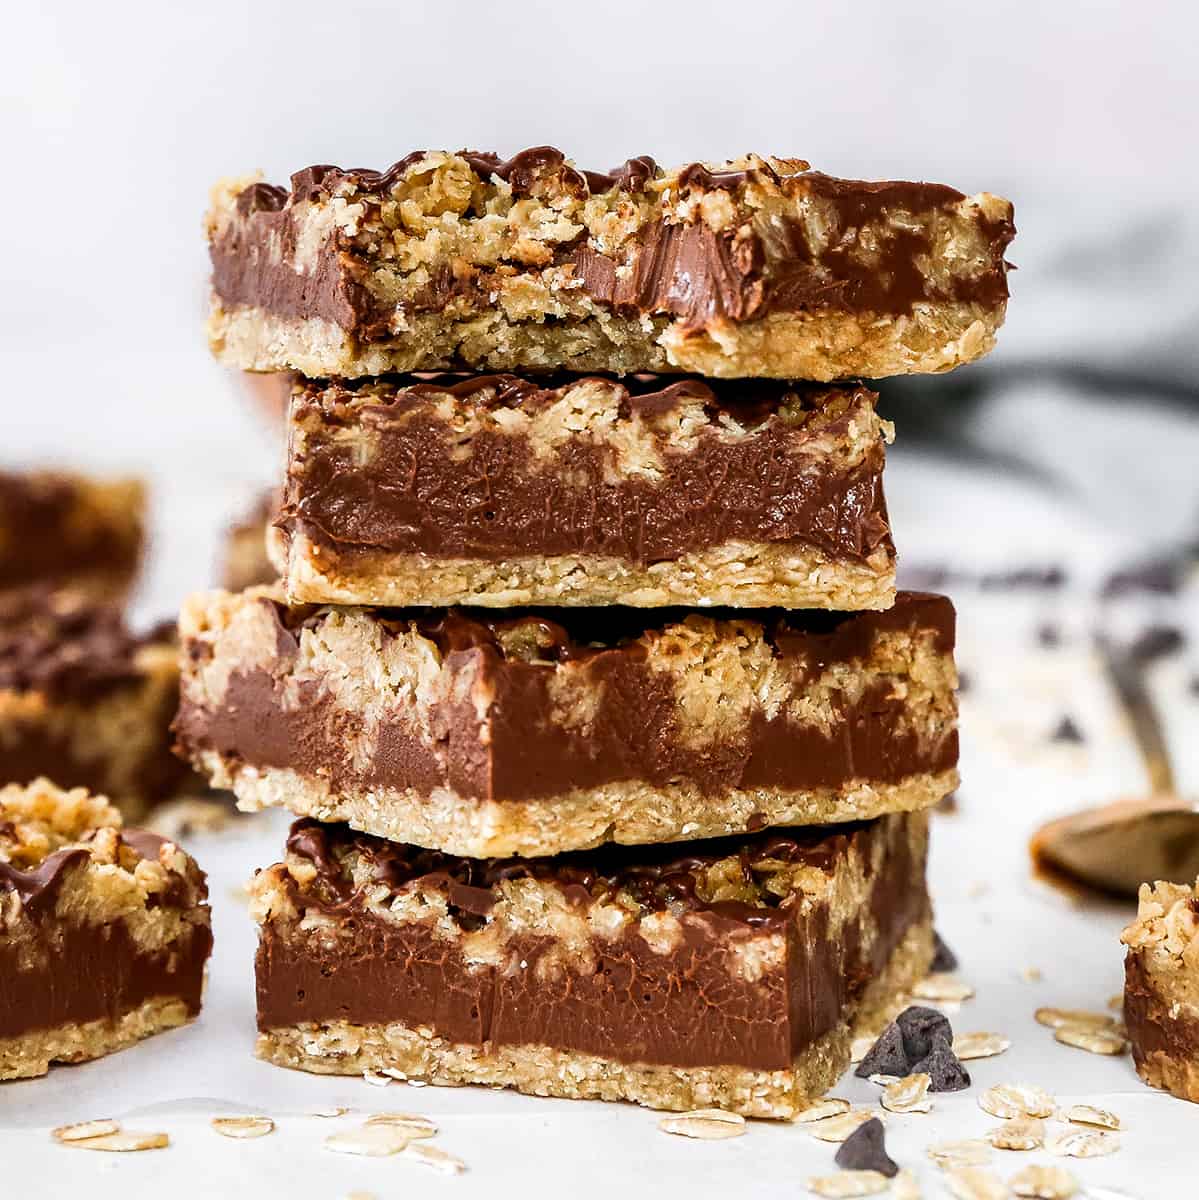 stack of 4 Chocolate Peanut Butter Oatmeal Bars, top one has a bite taken out of it